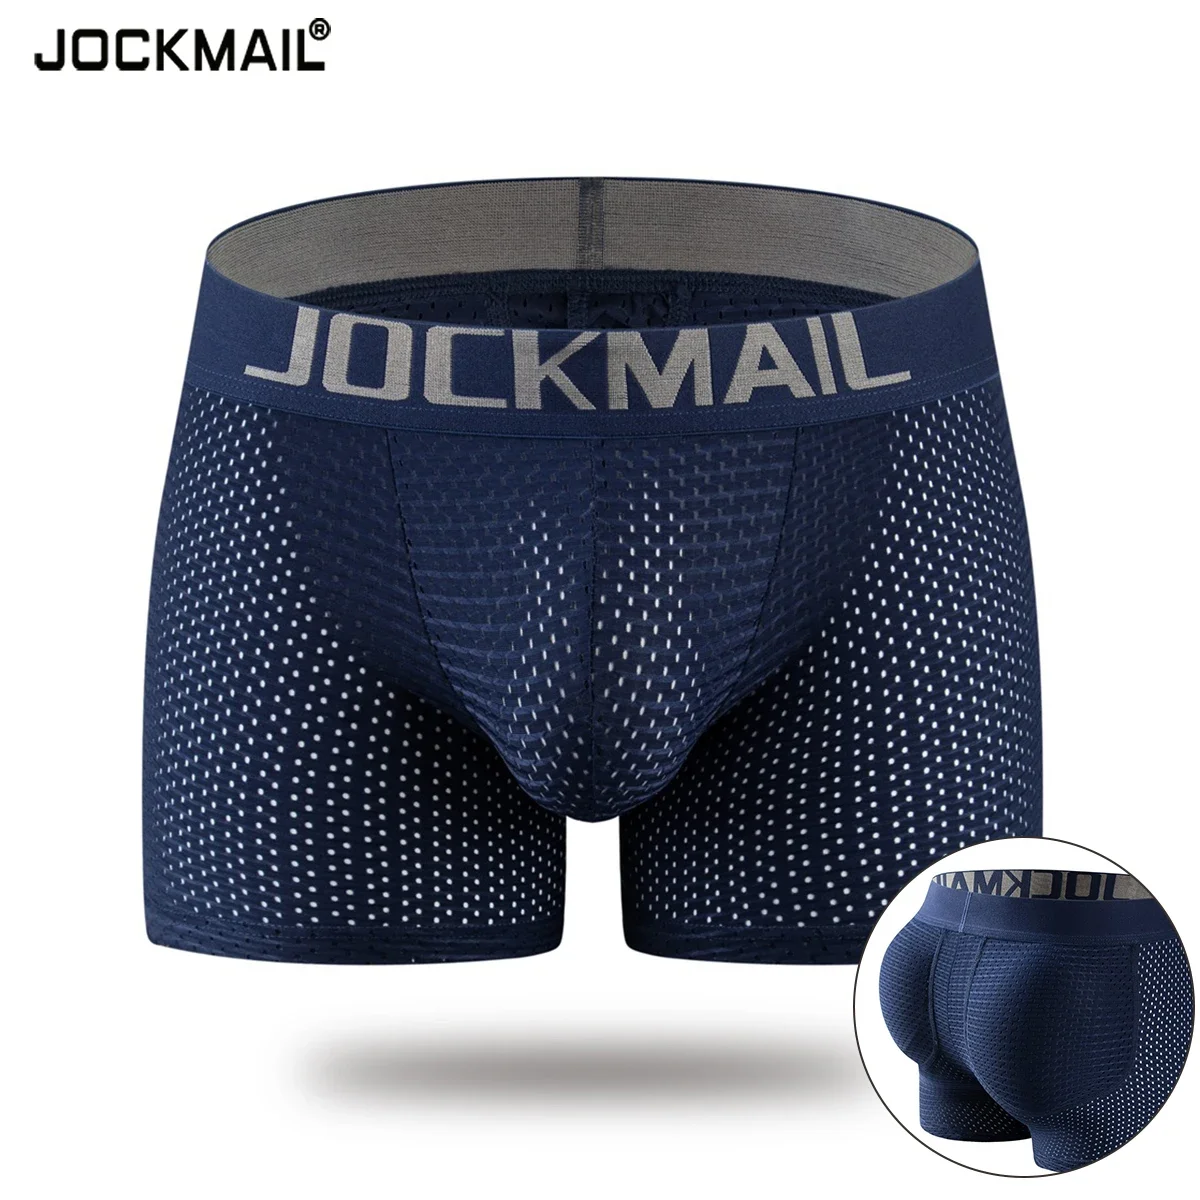 JOCKMAIL Sexy Underwear Men's Boxer Shorts Mesh U Pouch Sexy Underpants with Hip Pads Cueca Boxer Men Sleep Bottoms Male Trunks men sexy trunks front open hole boxers cover front shorts underpants silk smooth boxer mesh breathable briefs casual underwear